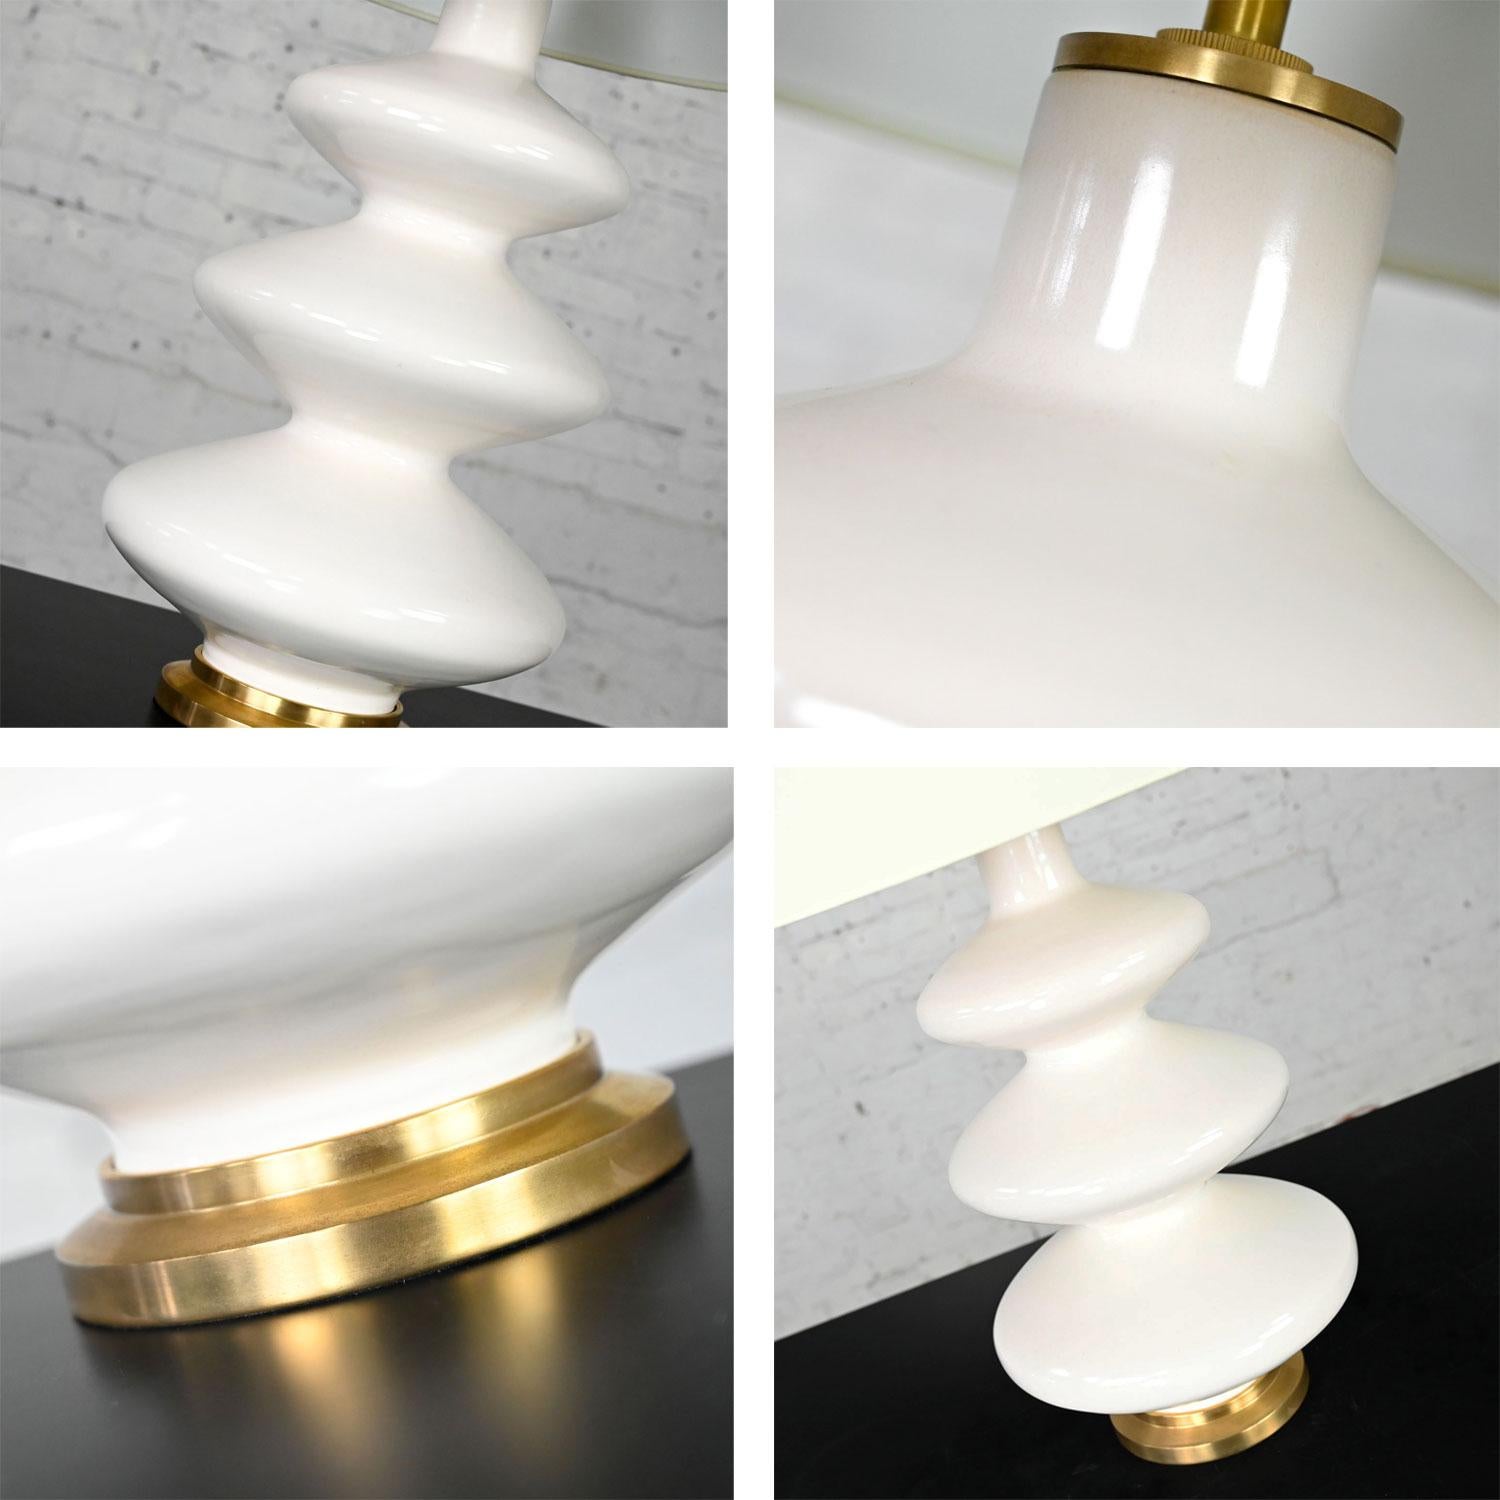 Smith Ivory Table Lamp Brass Details Christopher Spitzmiller for Visual Comfort 7